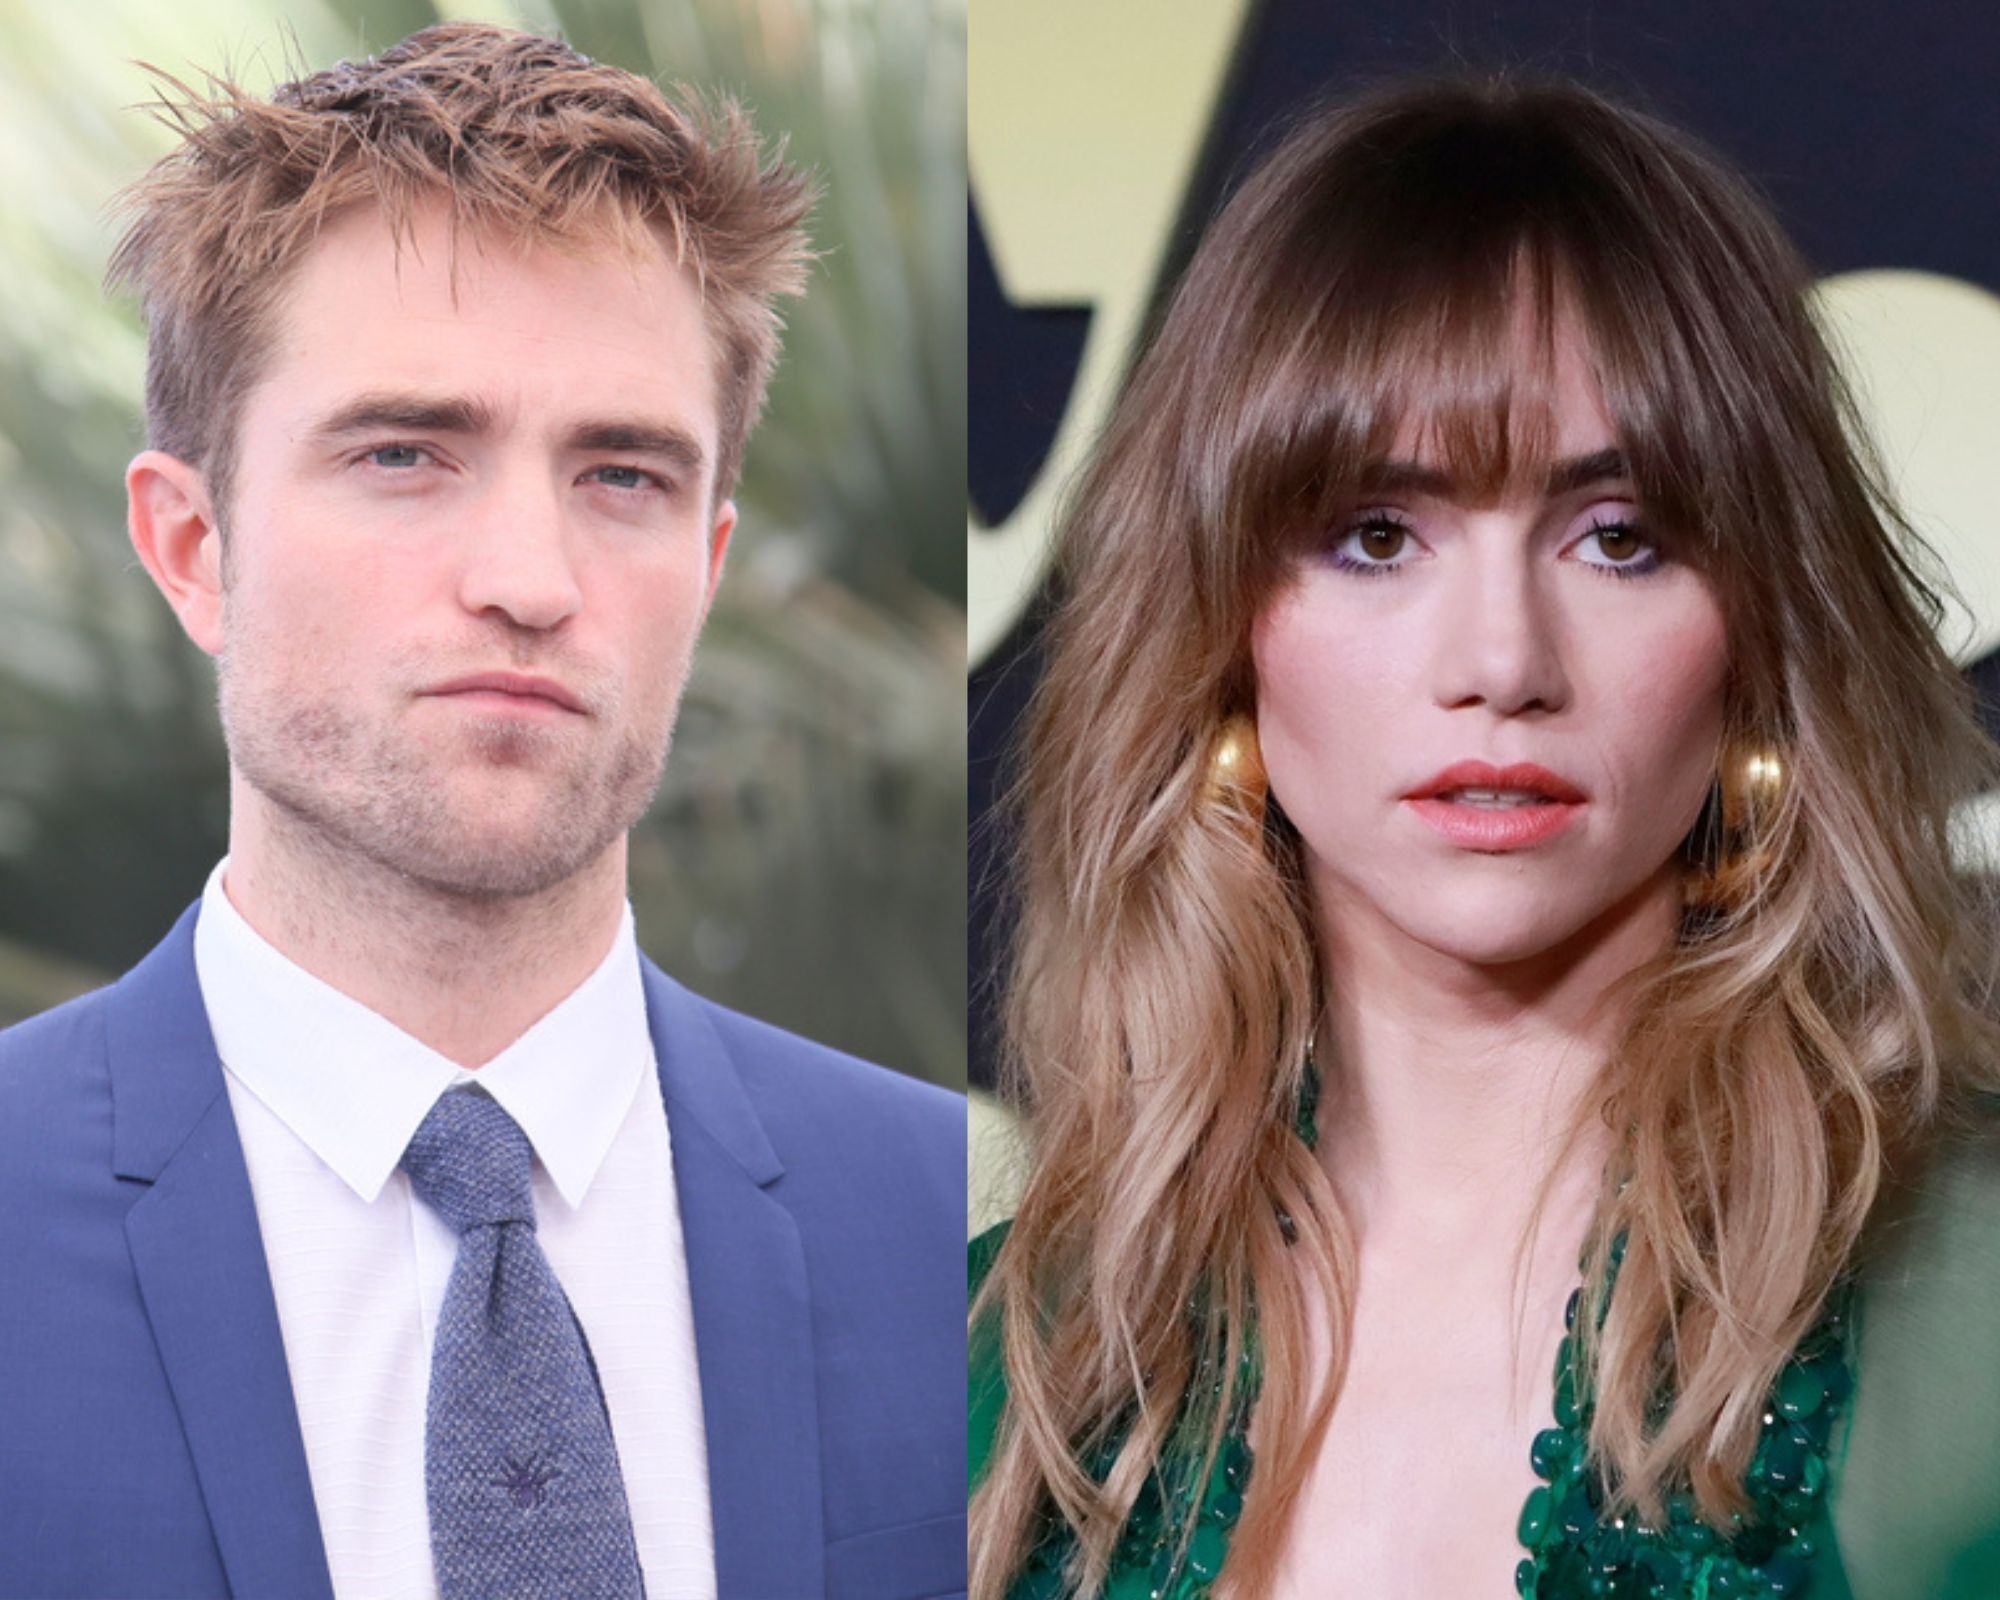 Robert Pattinson and Suki Waterhouse Welcome Their First Baby Together